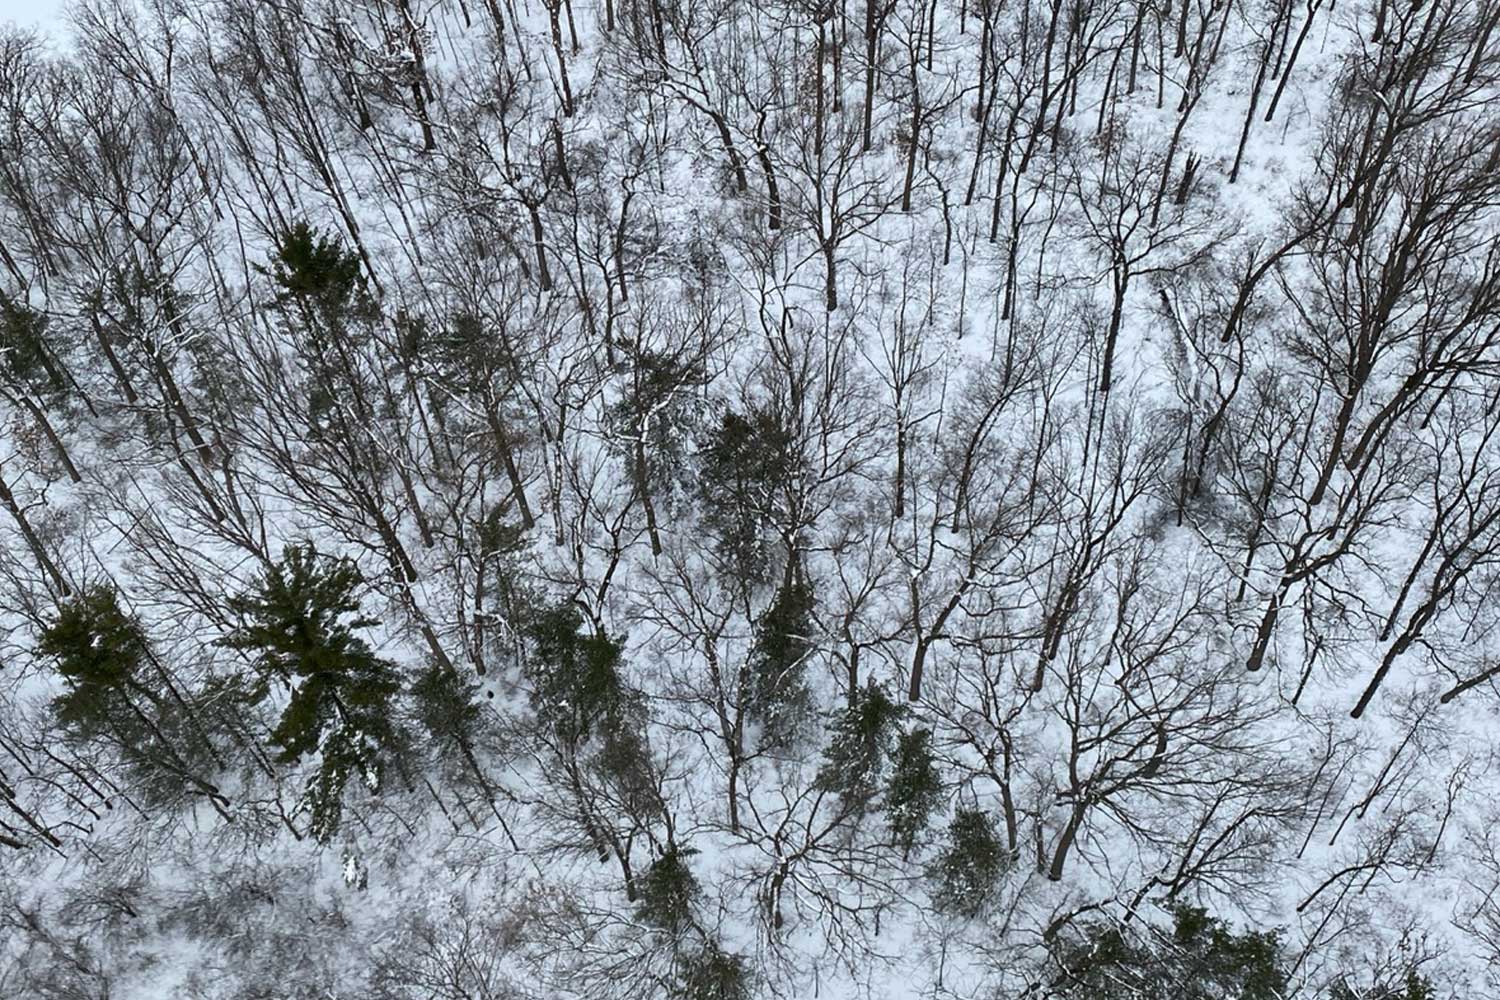 An aerial view of a snow-covered forest with stands of deciduous and evergreen trees.